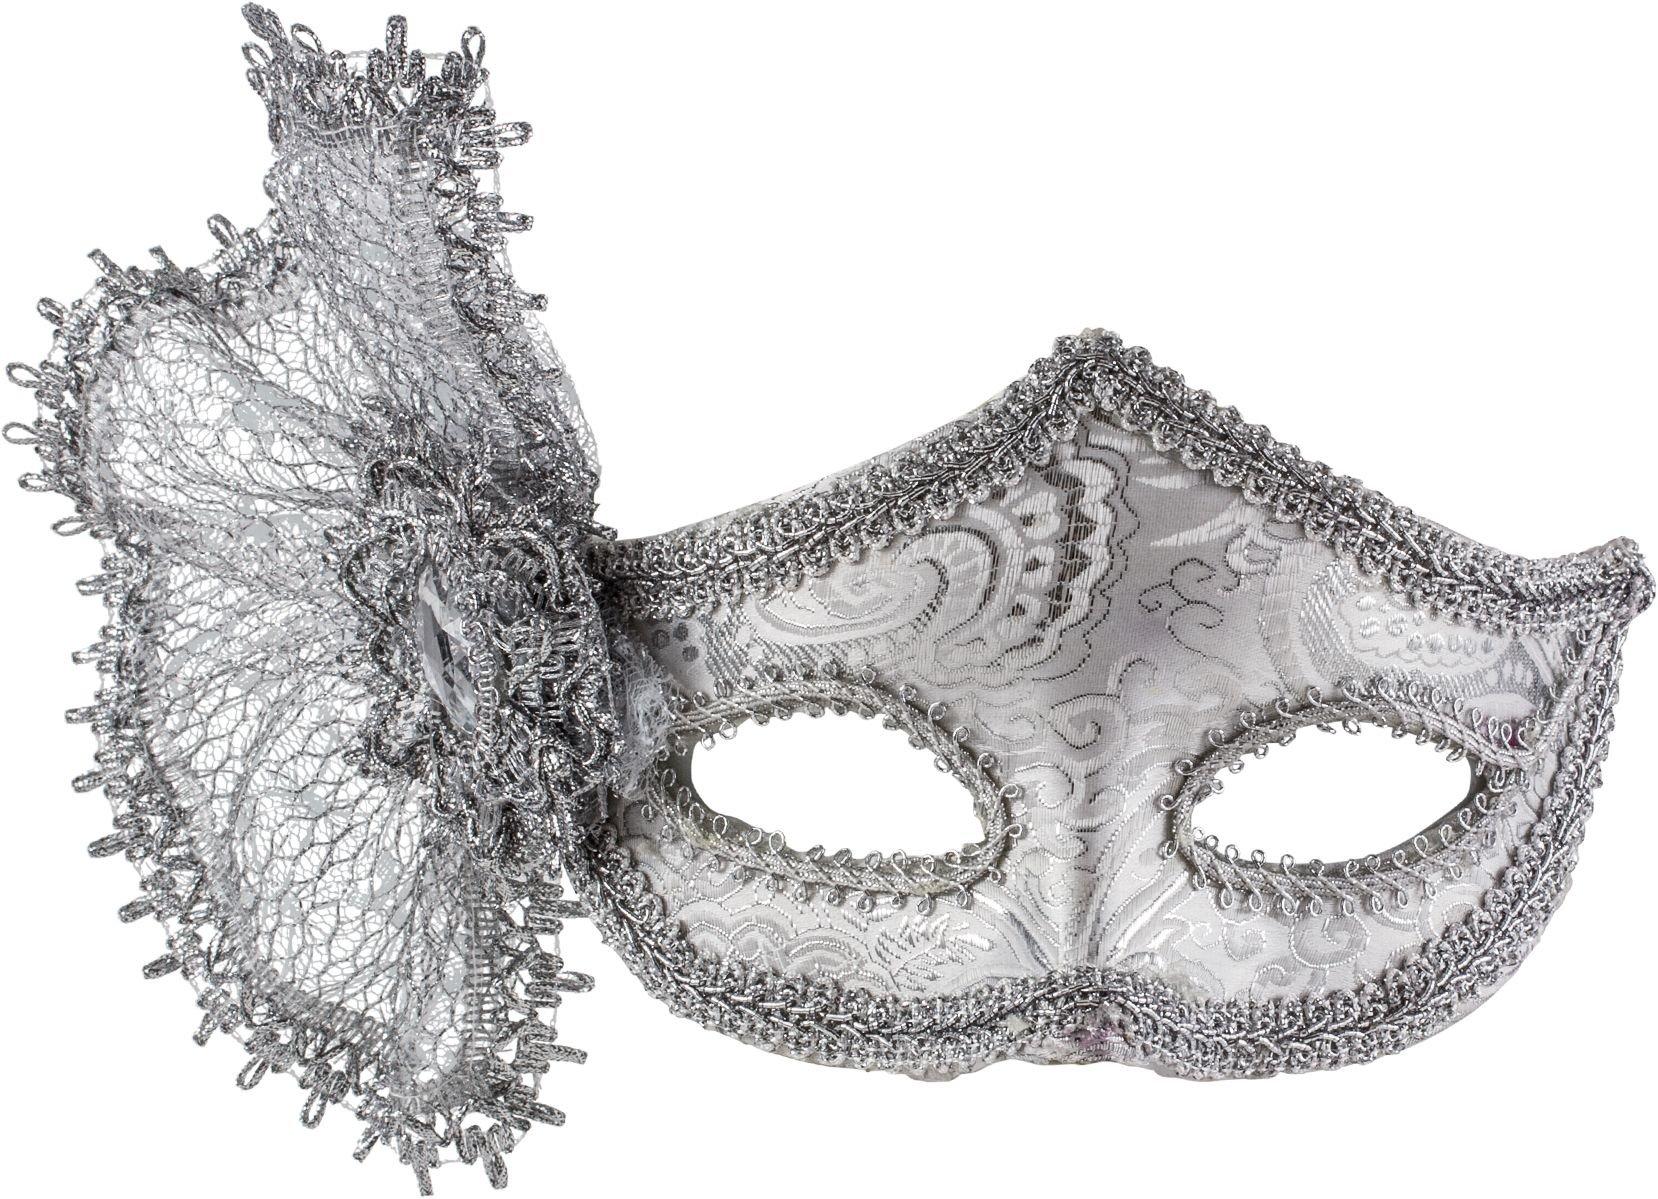 tank brysomme hoste Brocade Parisian Masquerade Mask 6 1/2in x 4in | Party City